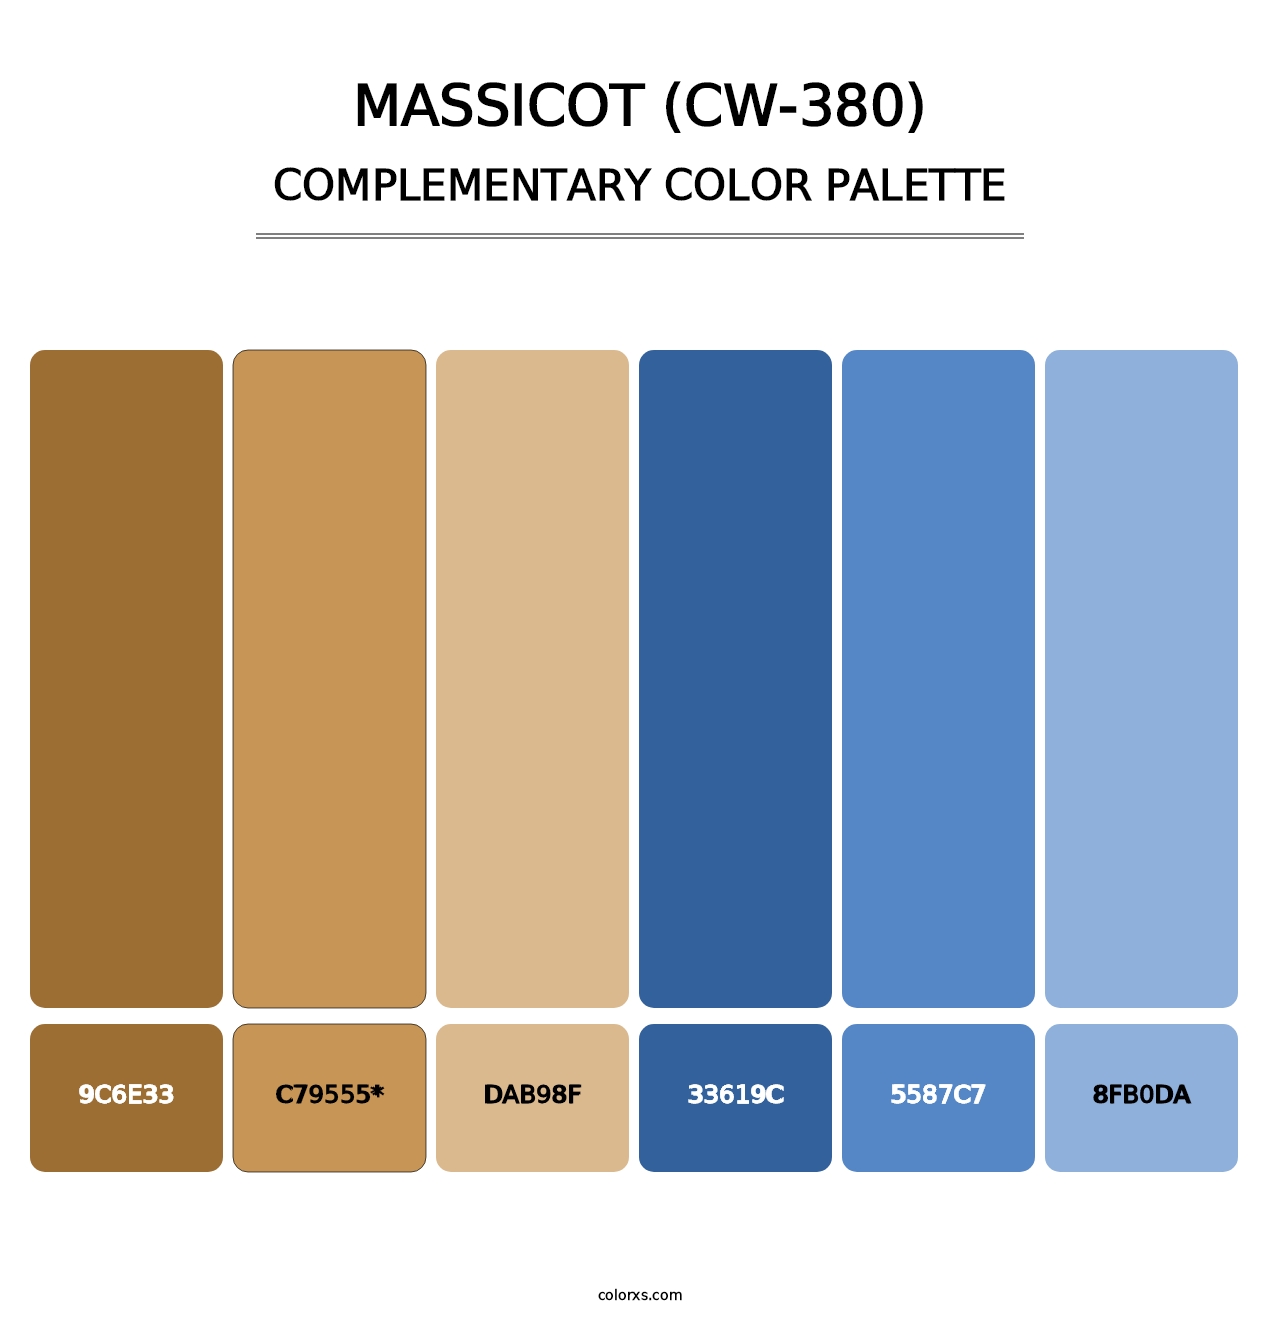 Massicot (CW-380) - Complementary Color Palette